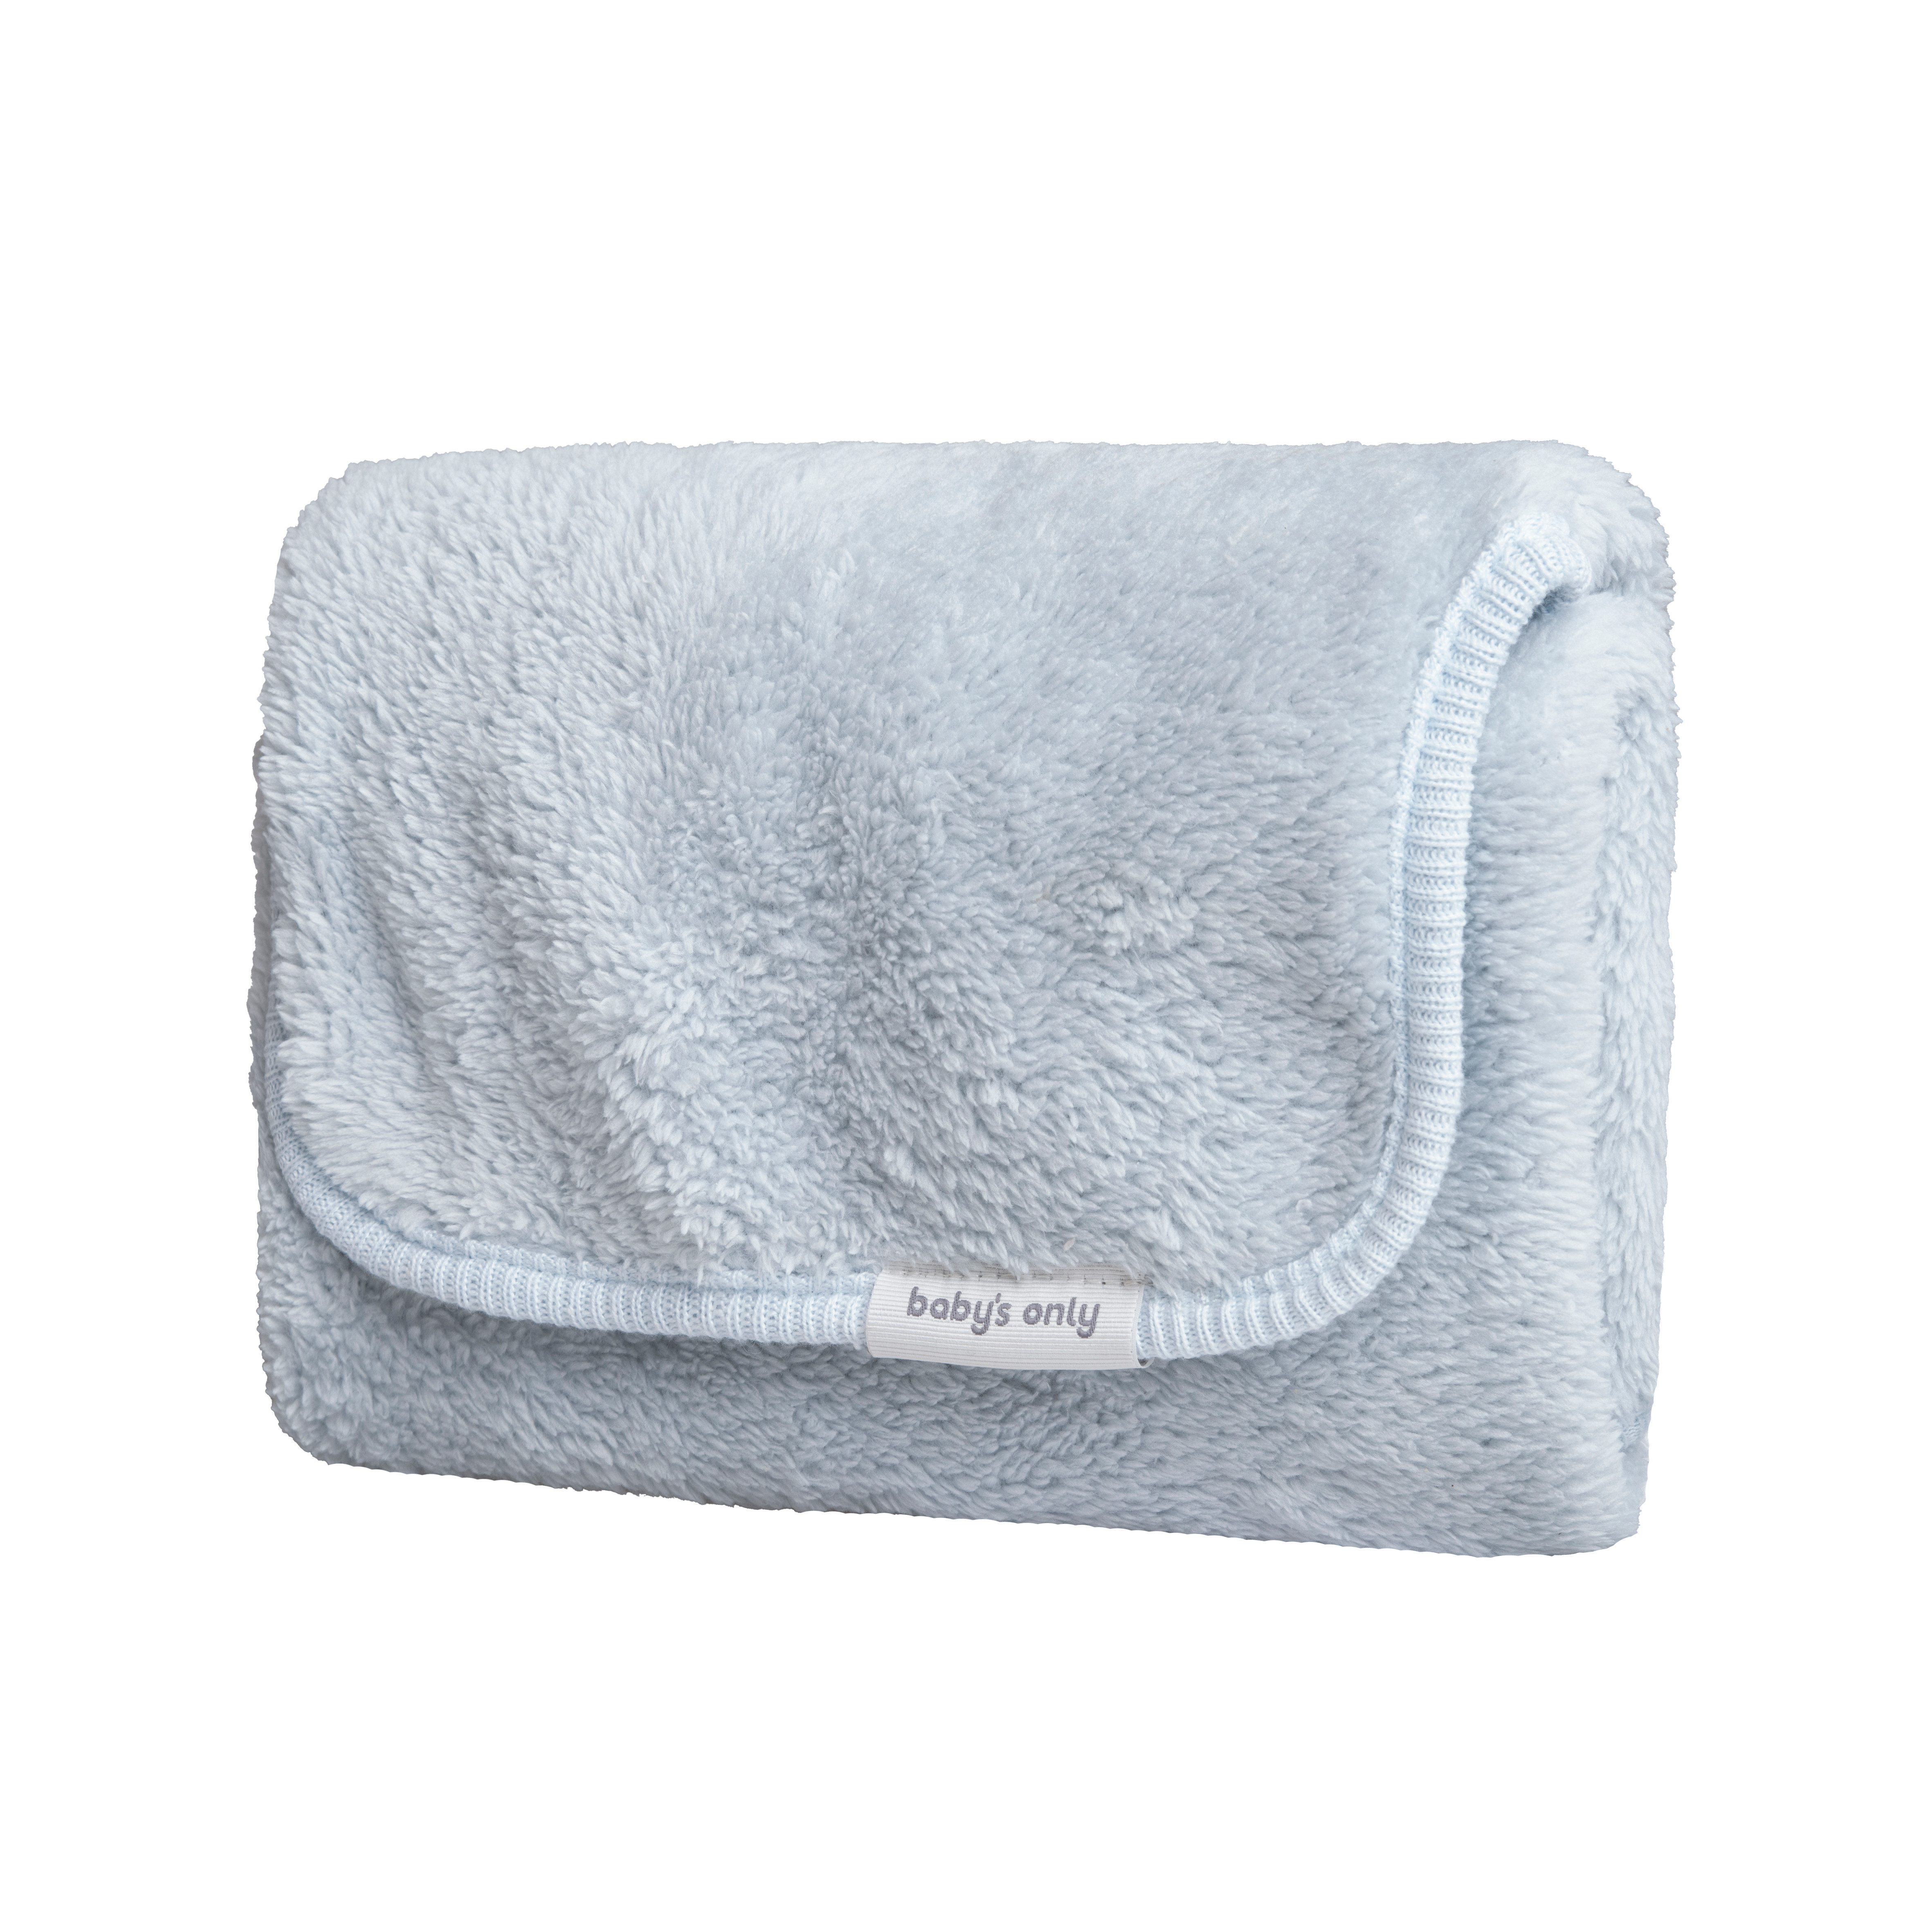 Changing mat Cozy misty blue